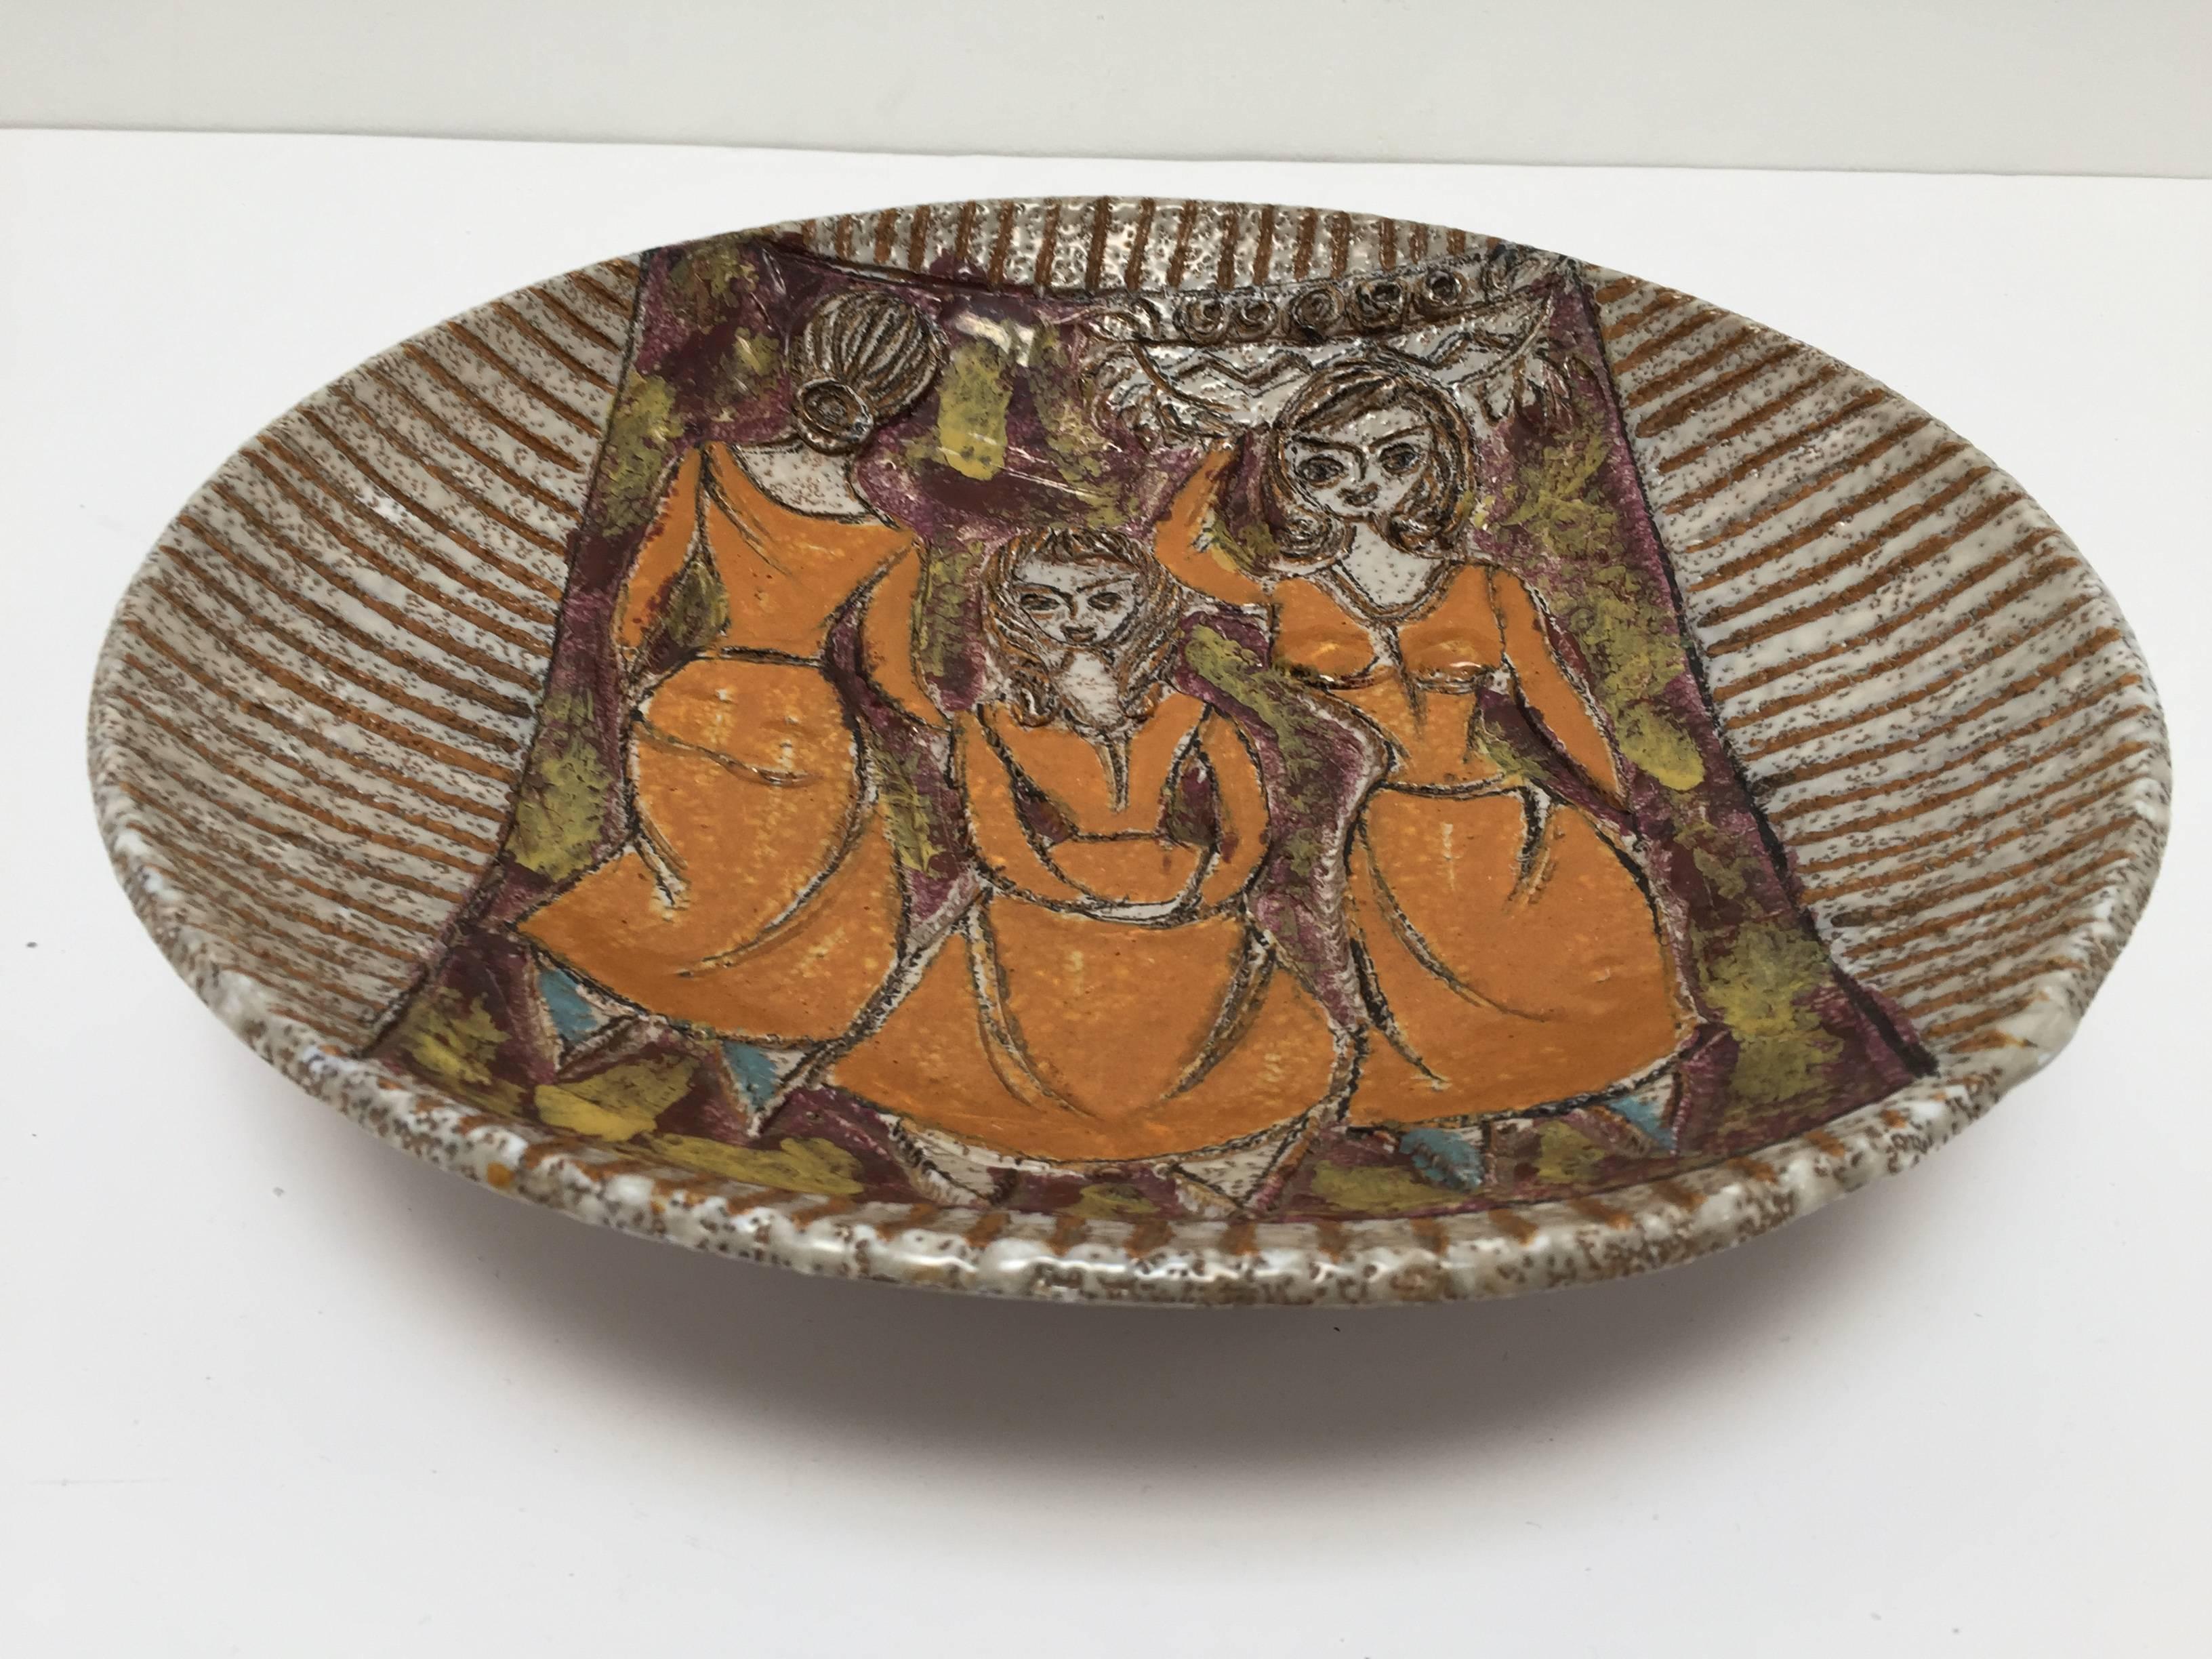 1950s Mid-Century Modern handcrafted and hand-decorated large bowl in the style of Fratelli Fanciullacci.
Vintage handcrafted Italian art studio pottery, Florence.
Bands with vertical sgraffito creating interest and dimensions with three ladies in